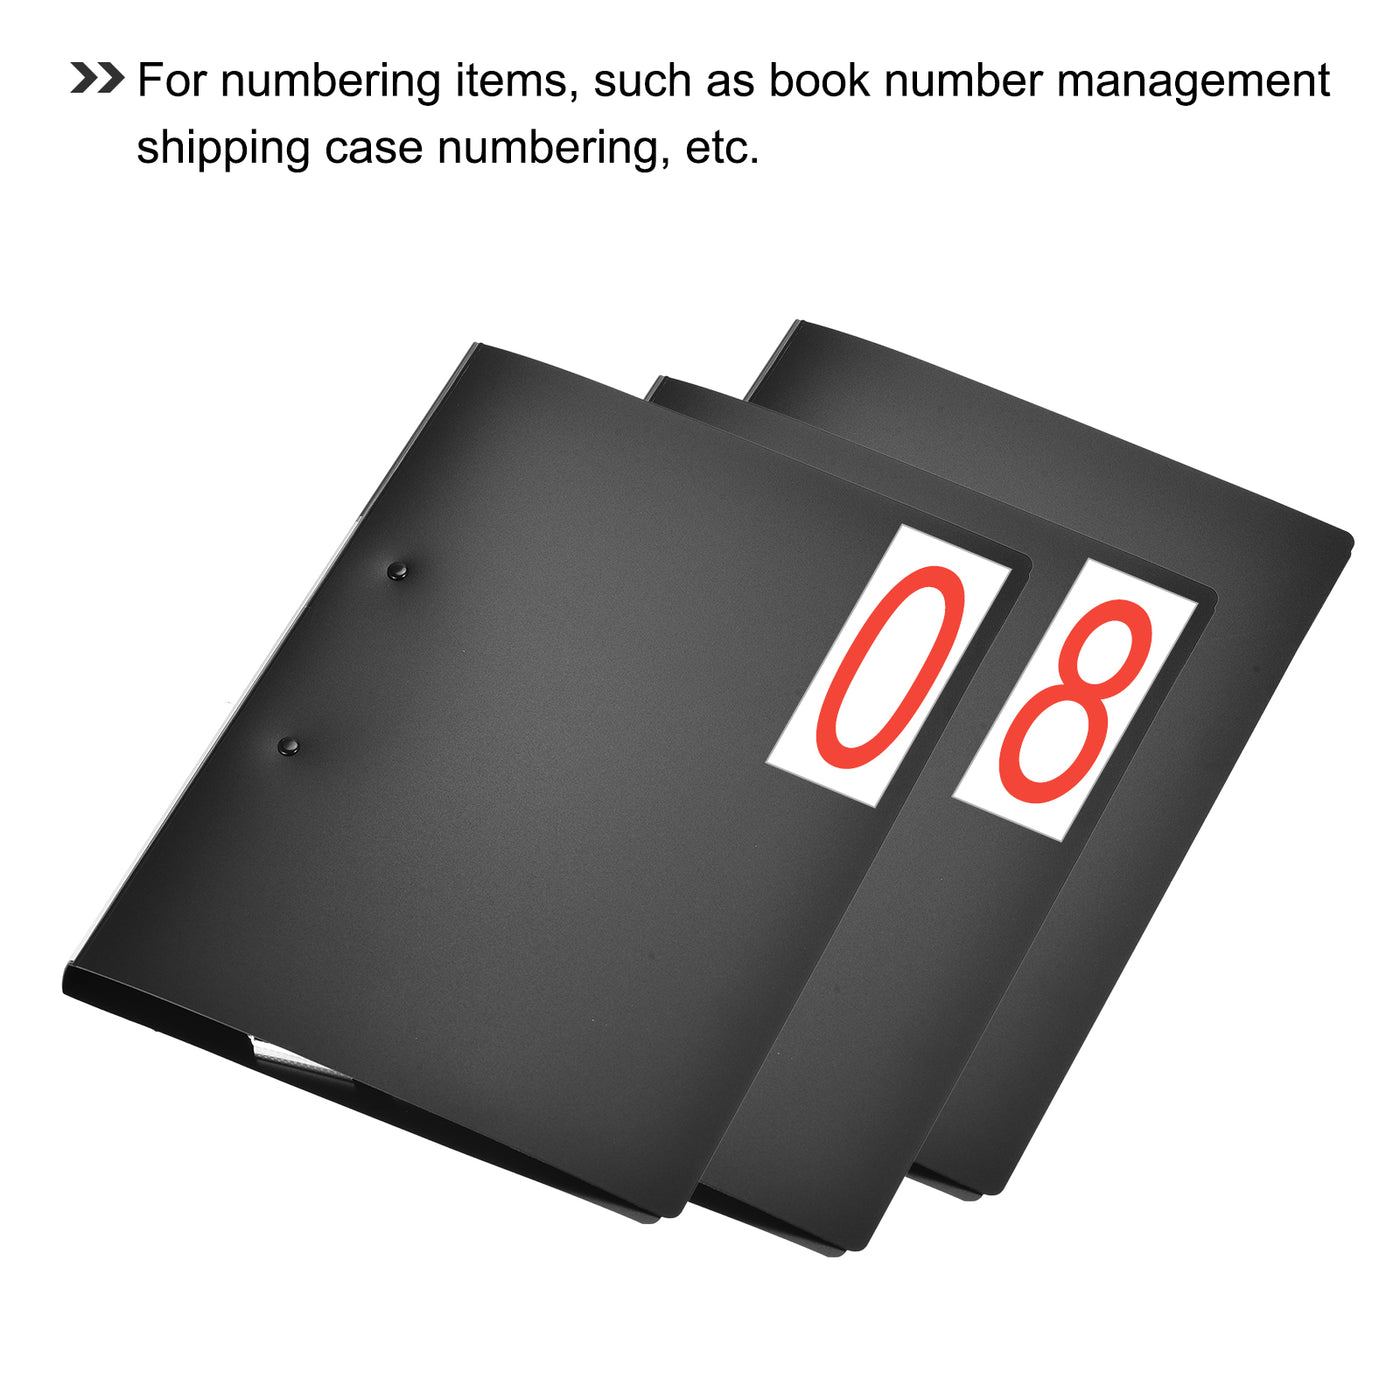 Harfington Mailbox Numbers Sticker Label Number Self Adhesive PVC Vinyl Label Red 76x25mm for Mailbox Signs, Pack of 10